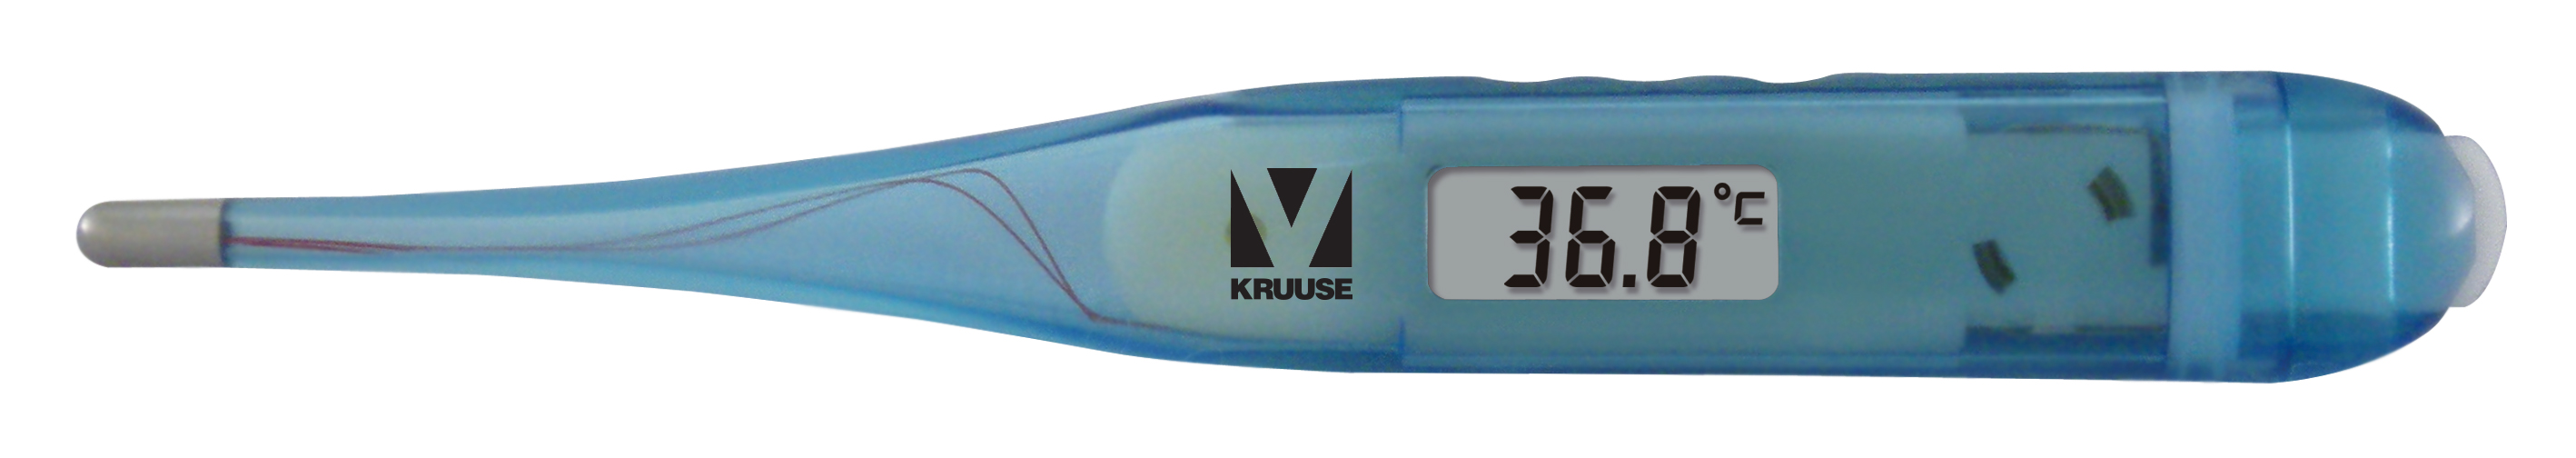 KRUUSE Digital Thermometer with logo
